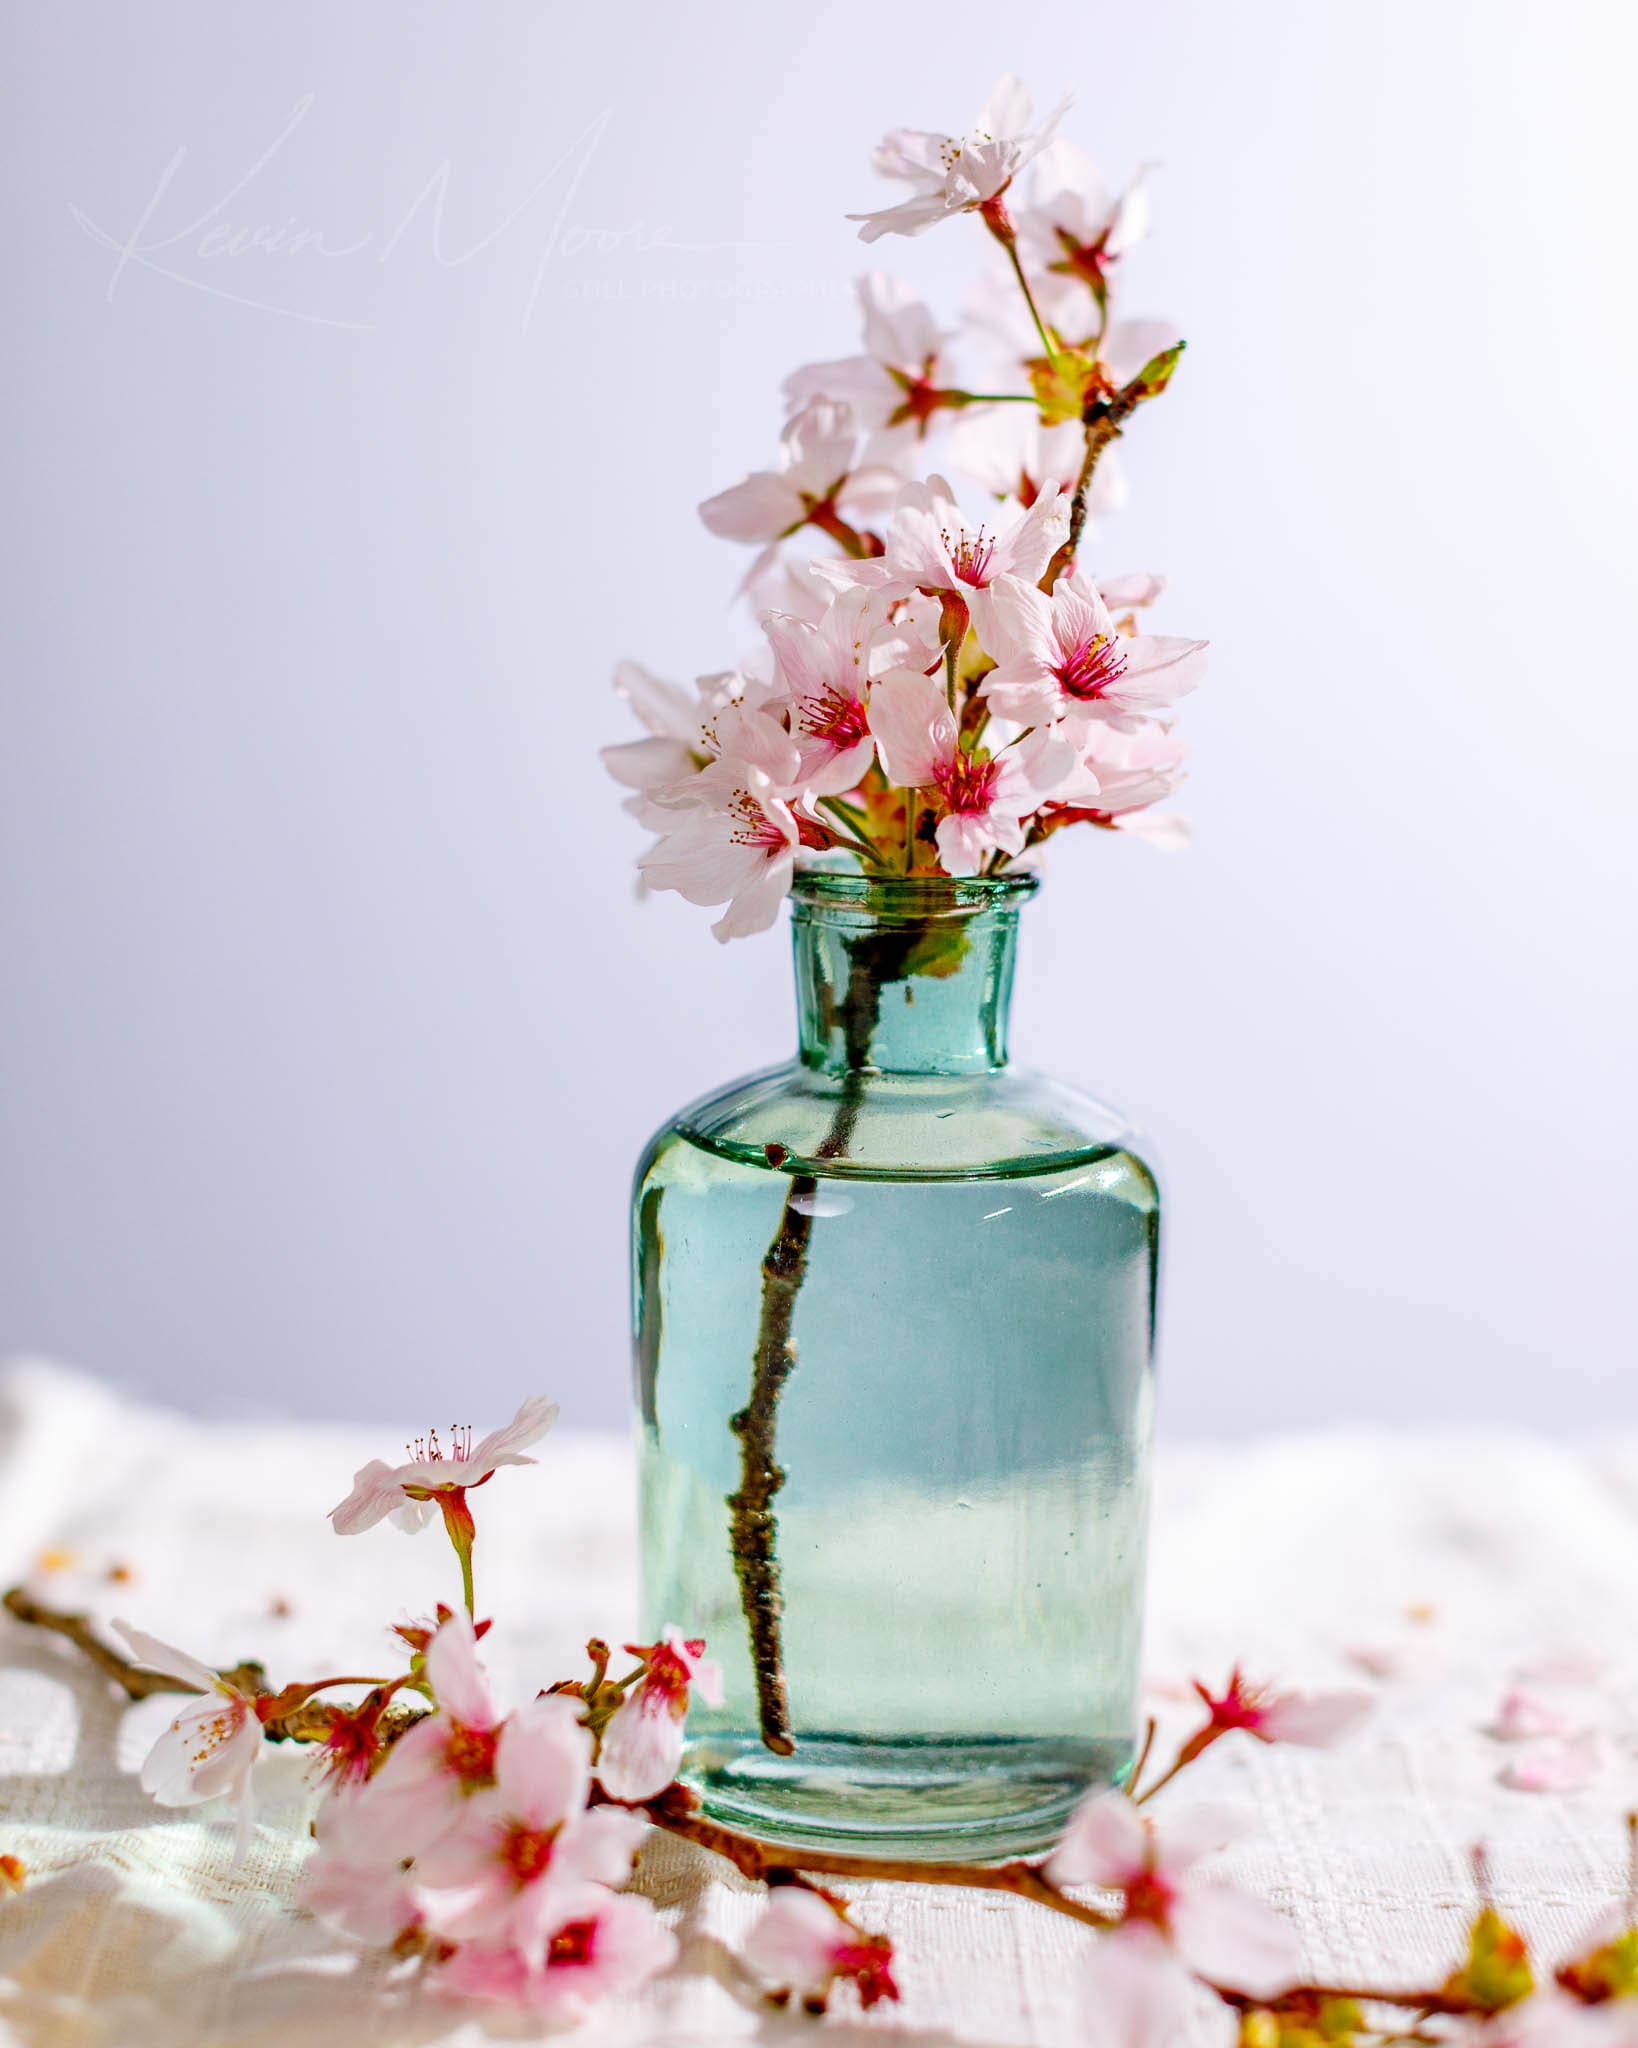 Blue-green glass vase with fresh cherry blossoms on a textured cream surface.